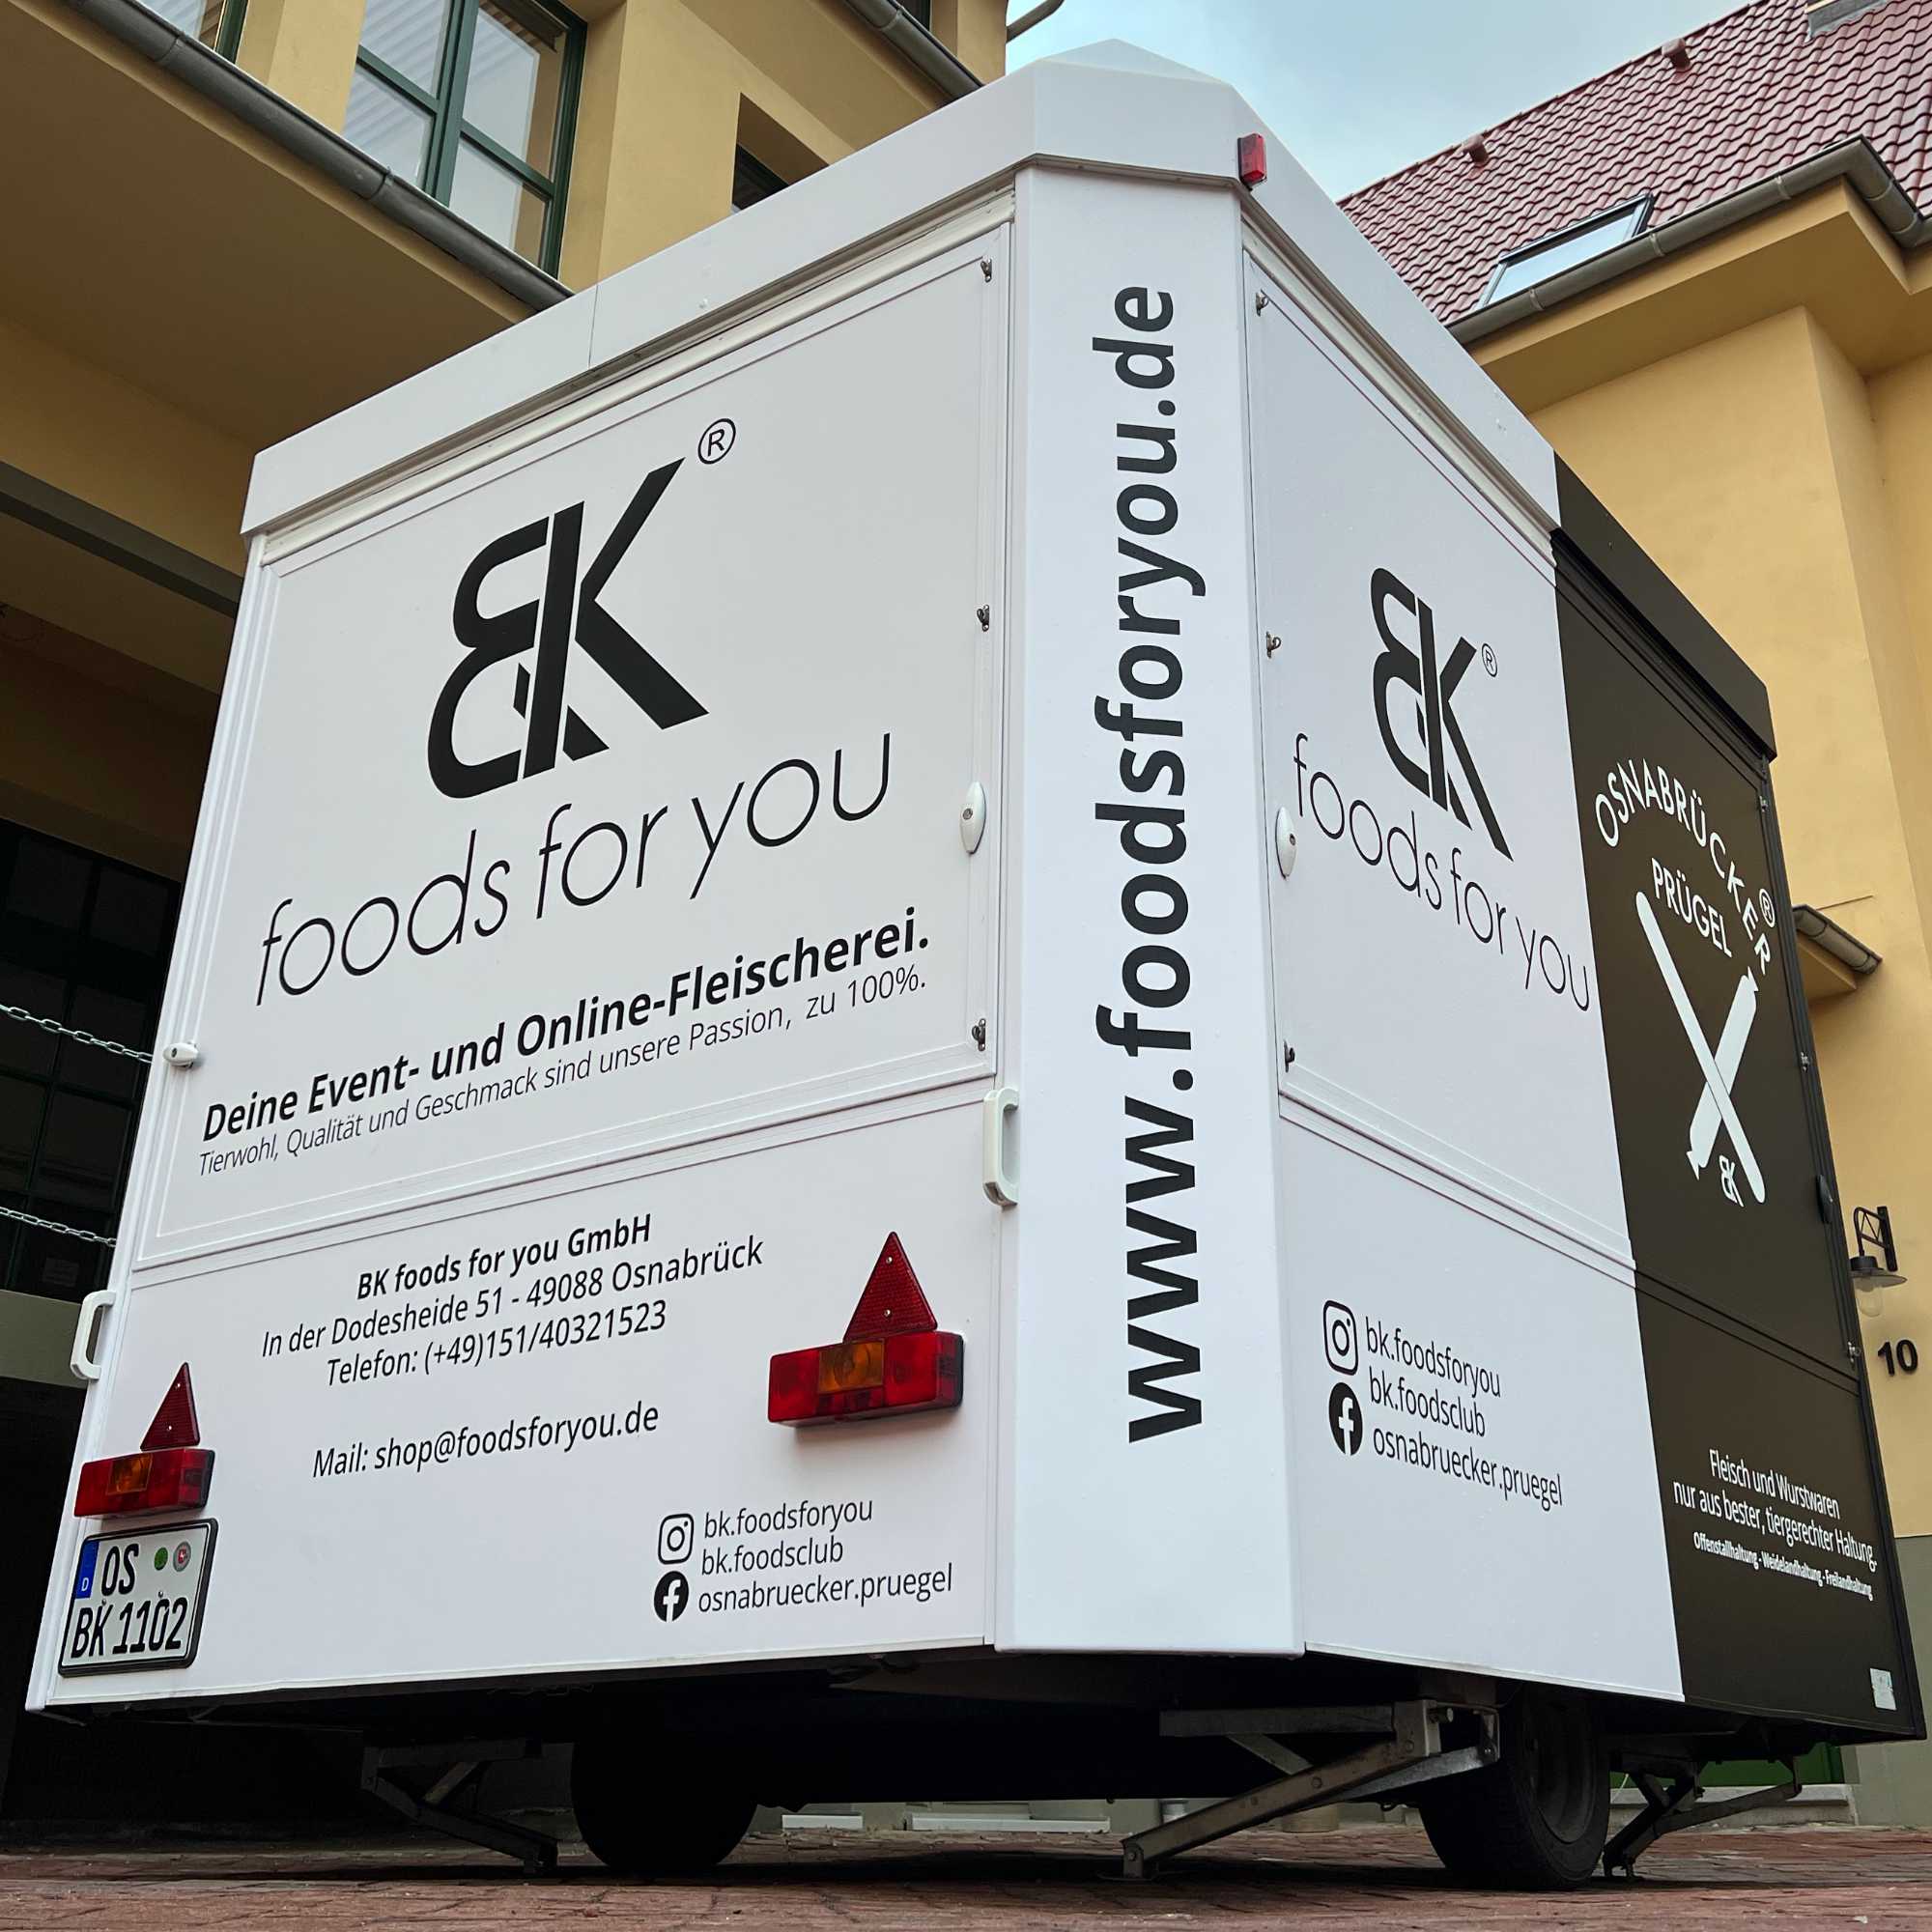 BK foods for you GmbH - Food-Trailer